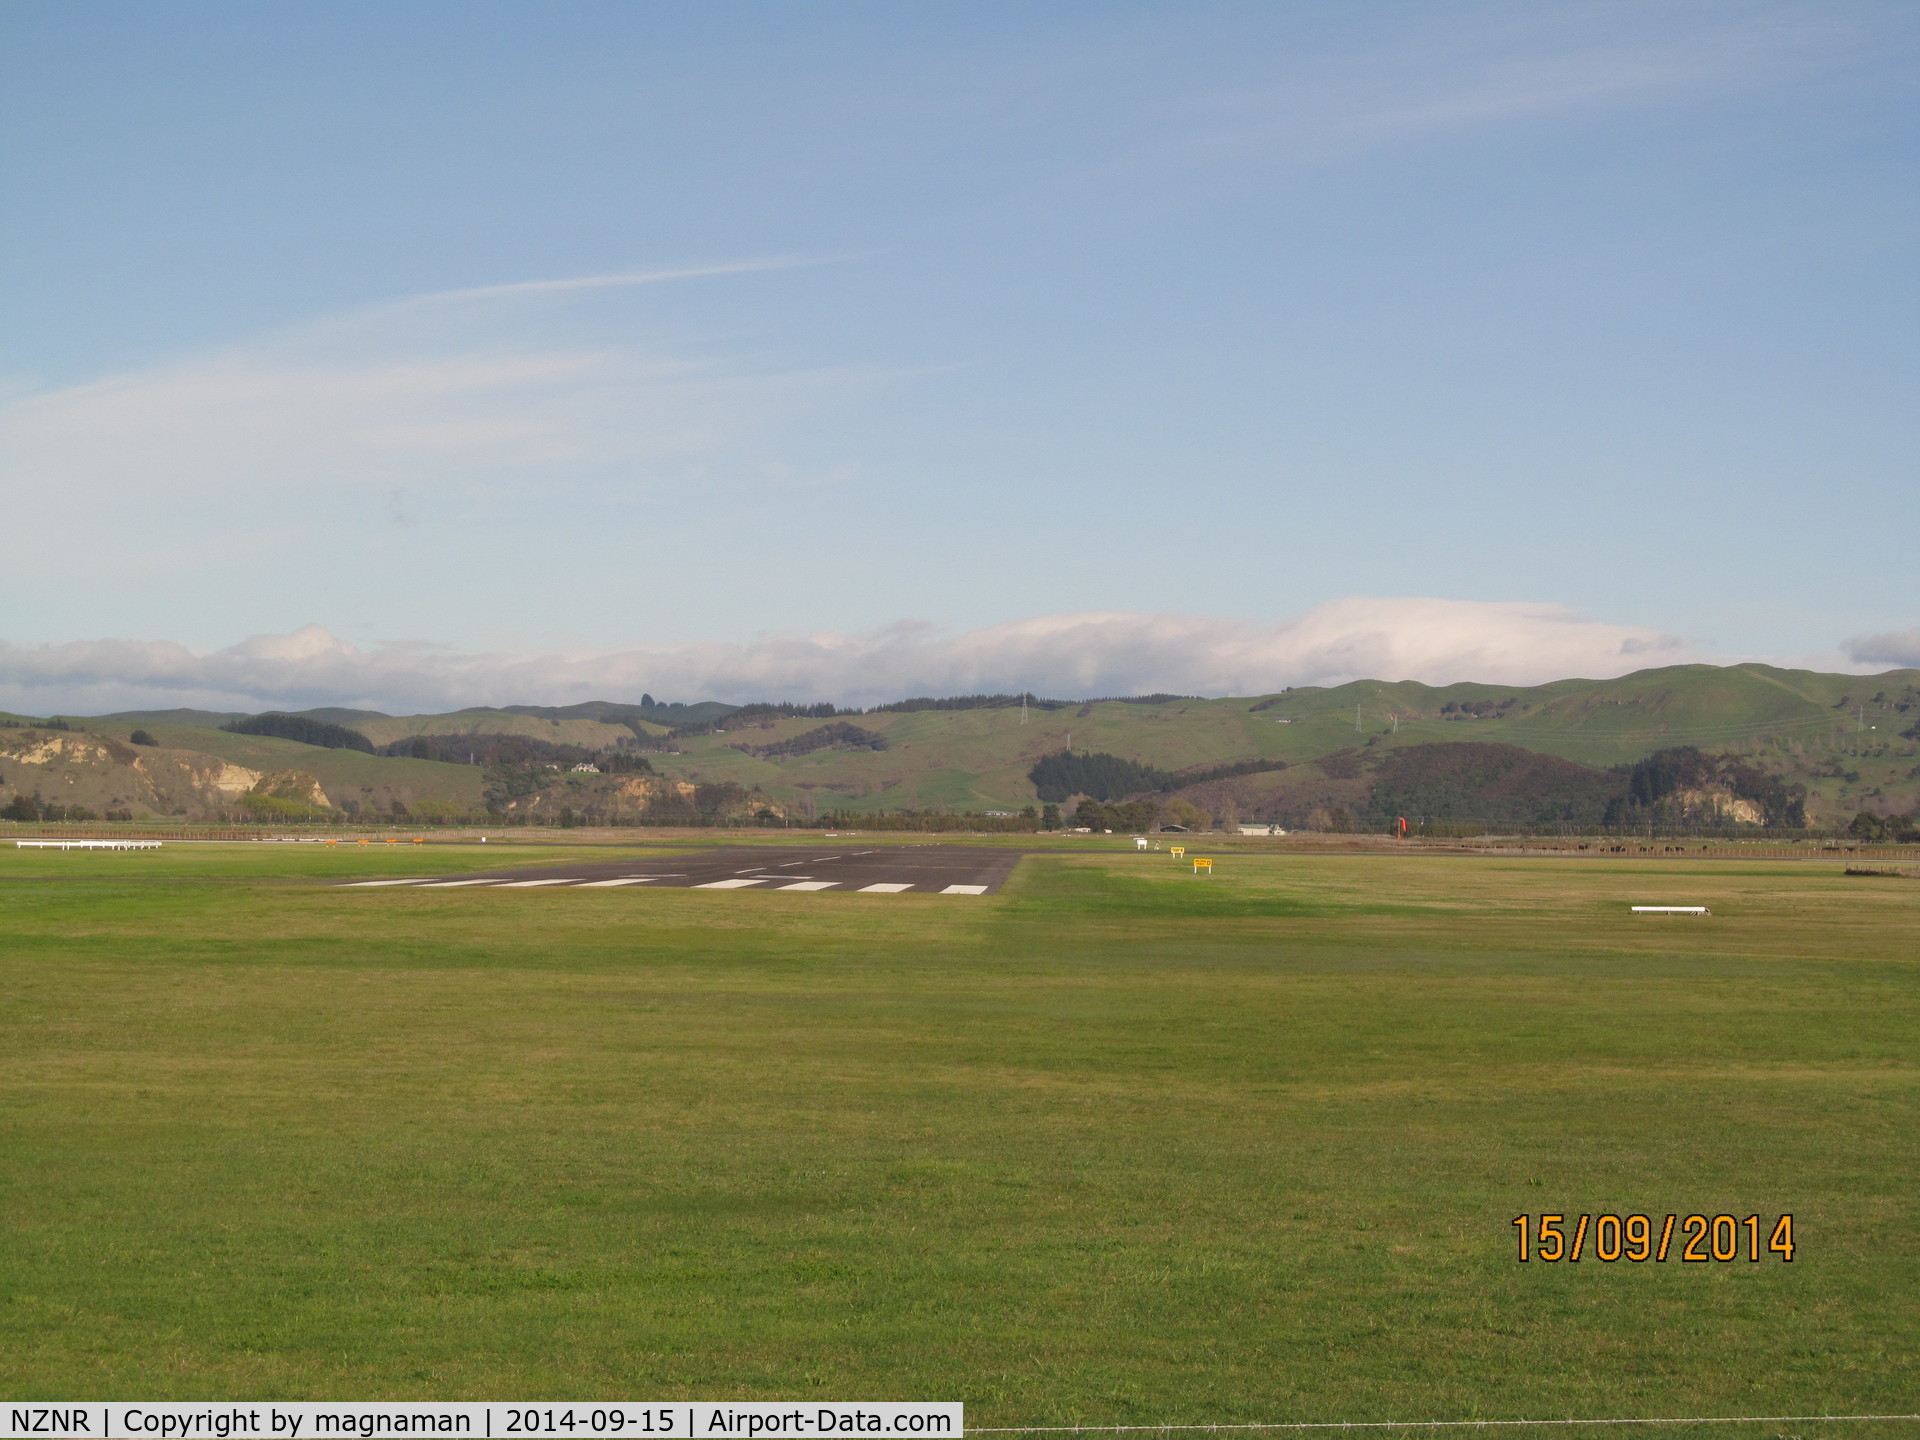 Napier Airport, Napier New Zealand (NZNR) - second runway at napier - never seen it before this trip.